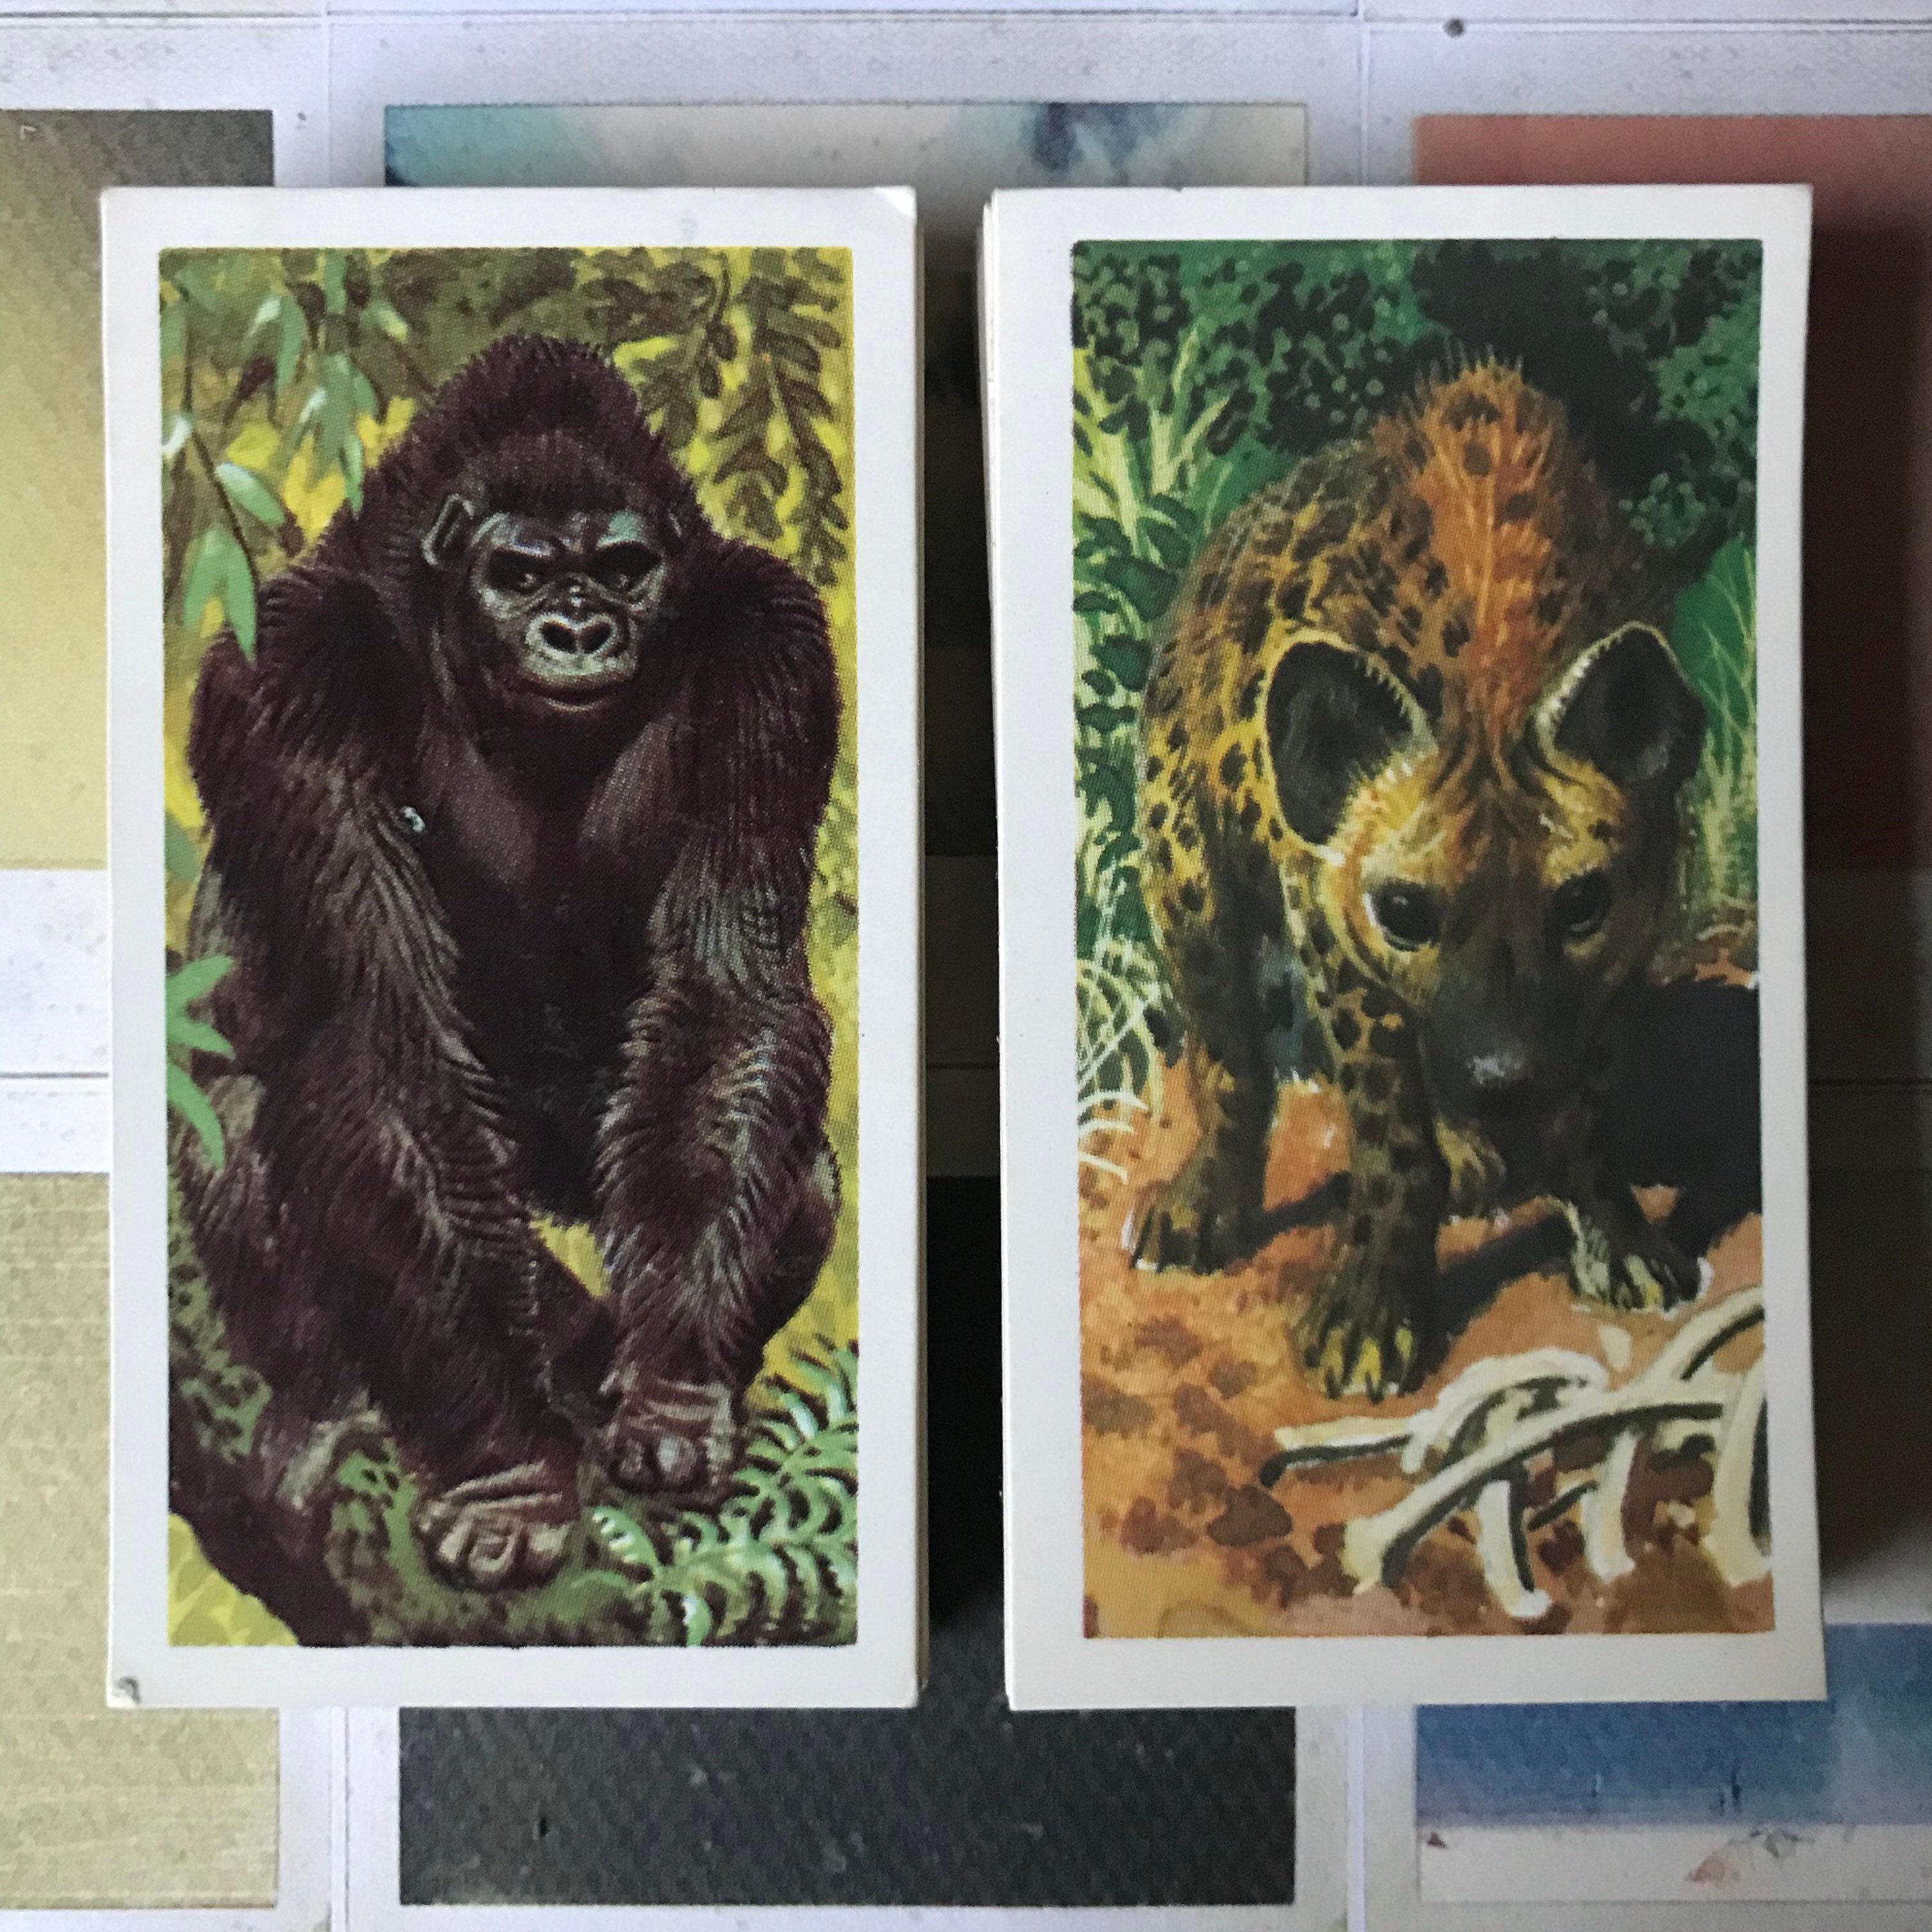 Details about   1962  Brooke Bond Tea AFRICAN WILD LIFE  Lions Africa Trading  Set of 50 cards s 